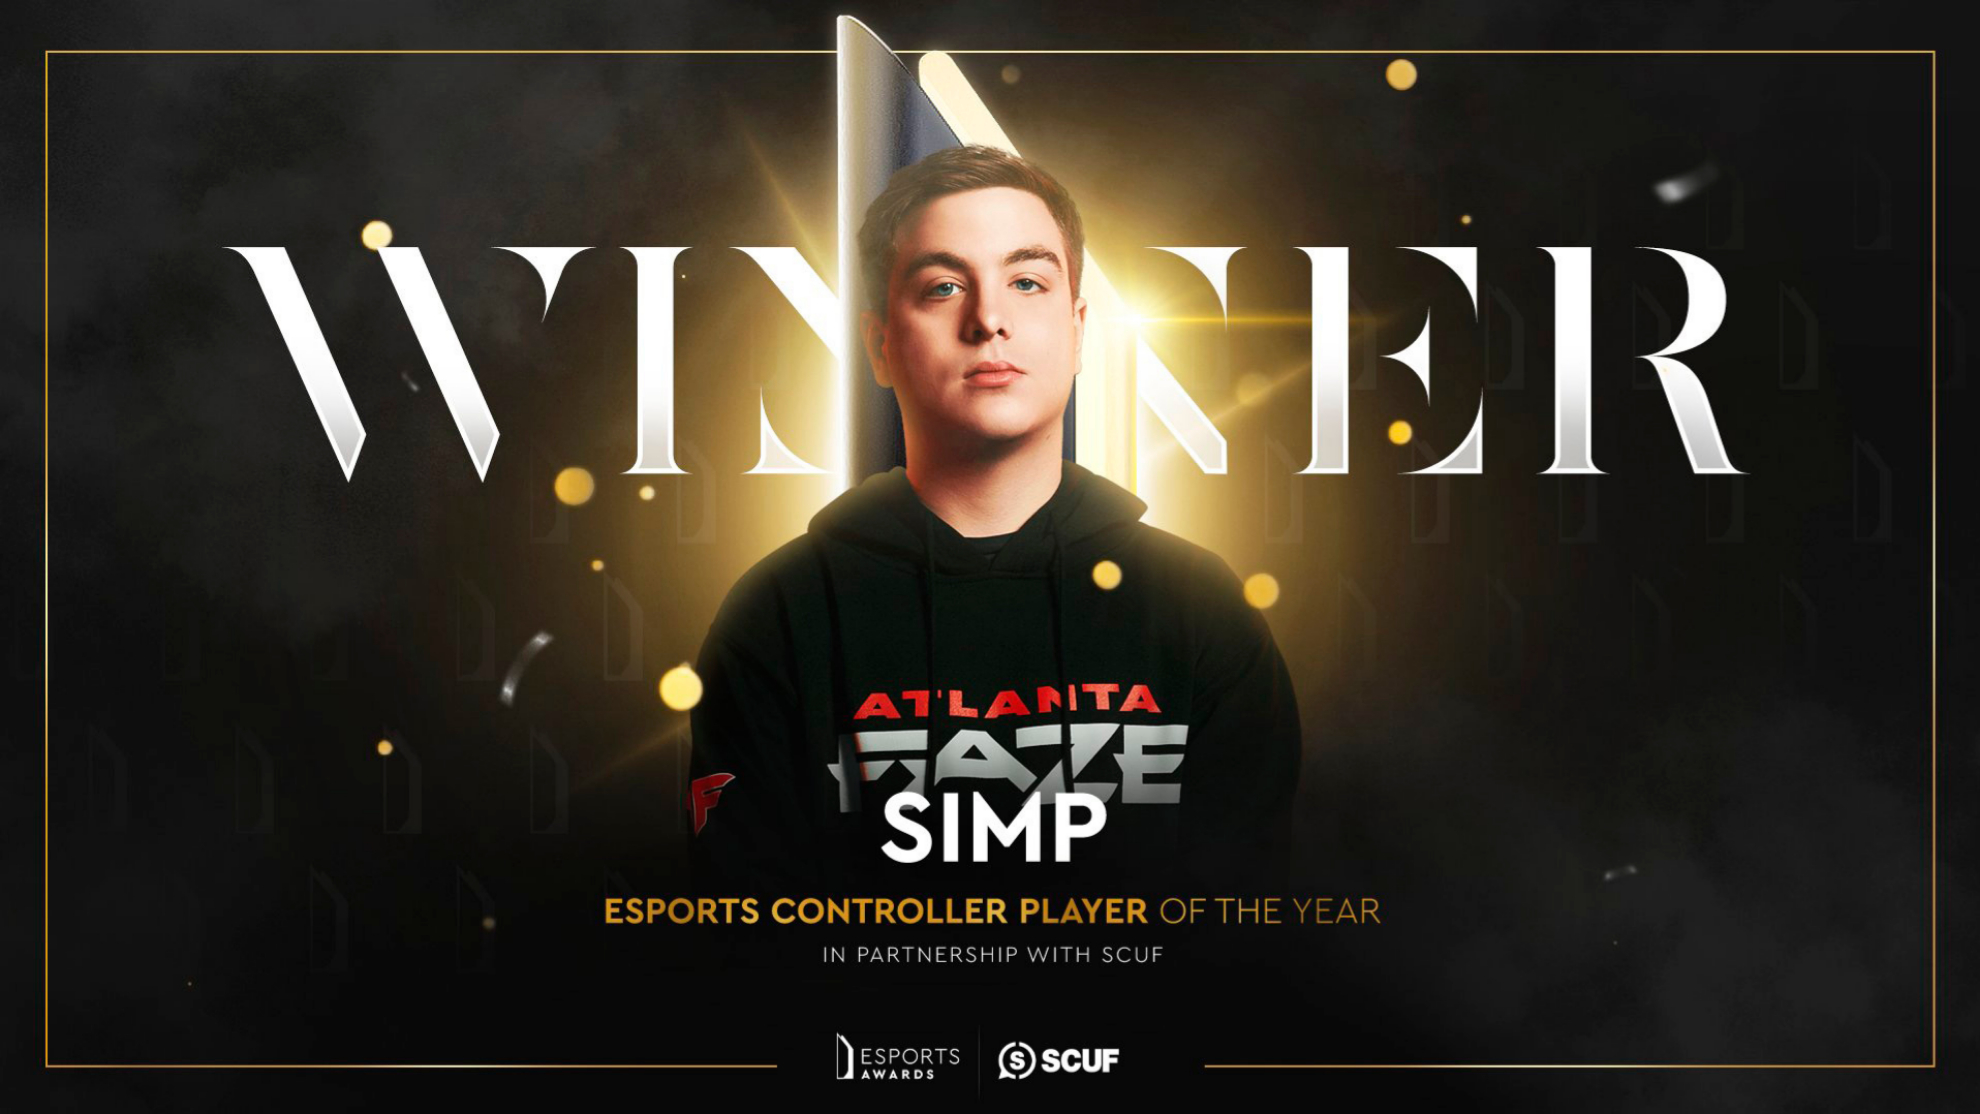 Esports Controller Player of the Year